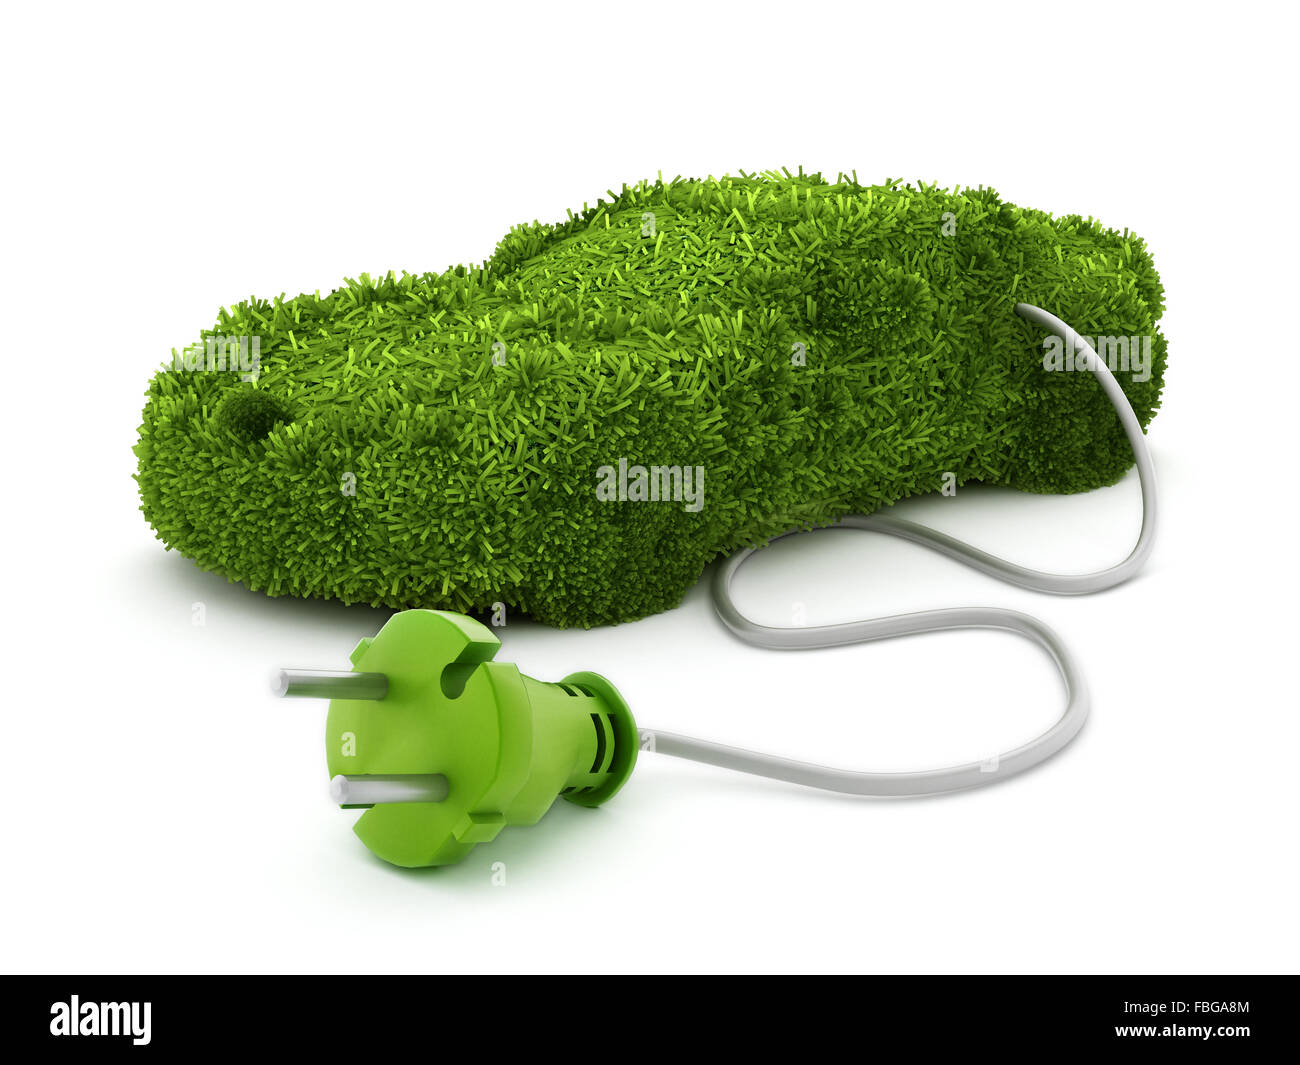 Green car covered with grass texture connected to the electric plug. Stock Photo